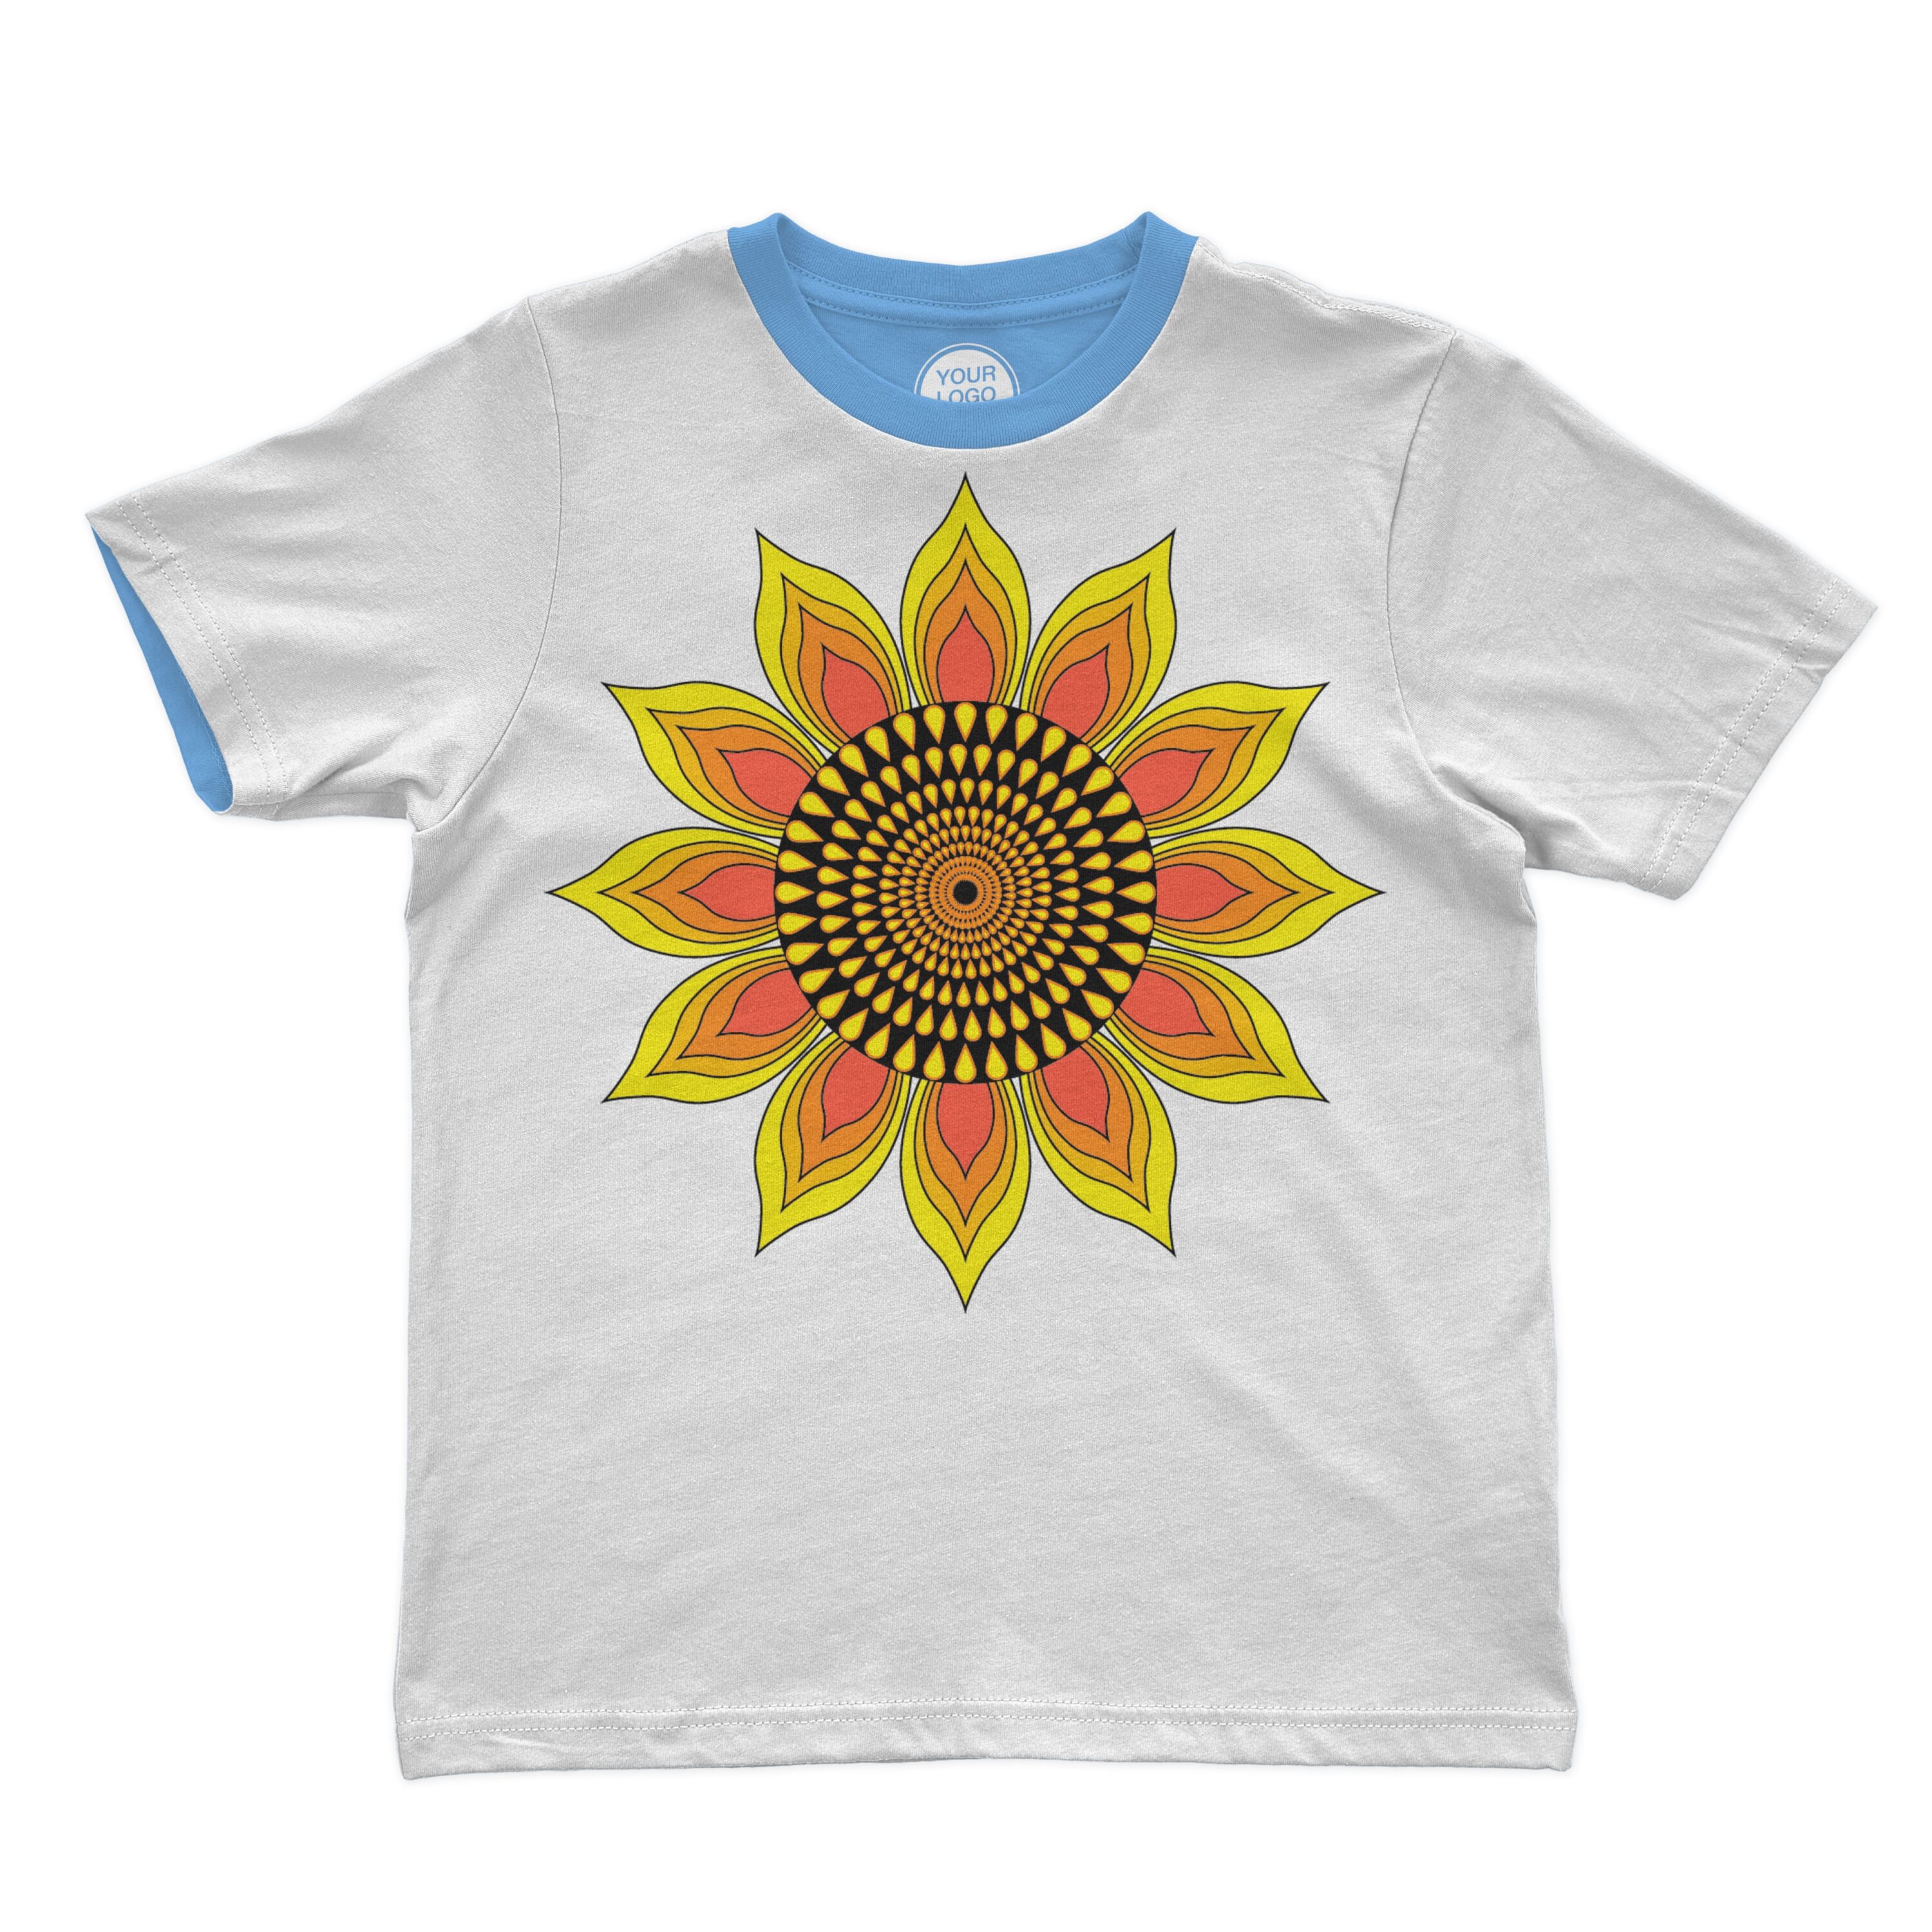 Hippie sunflower printed on the t-shirt.